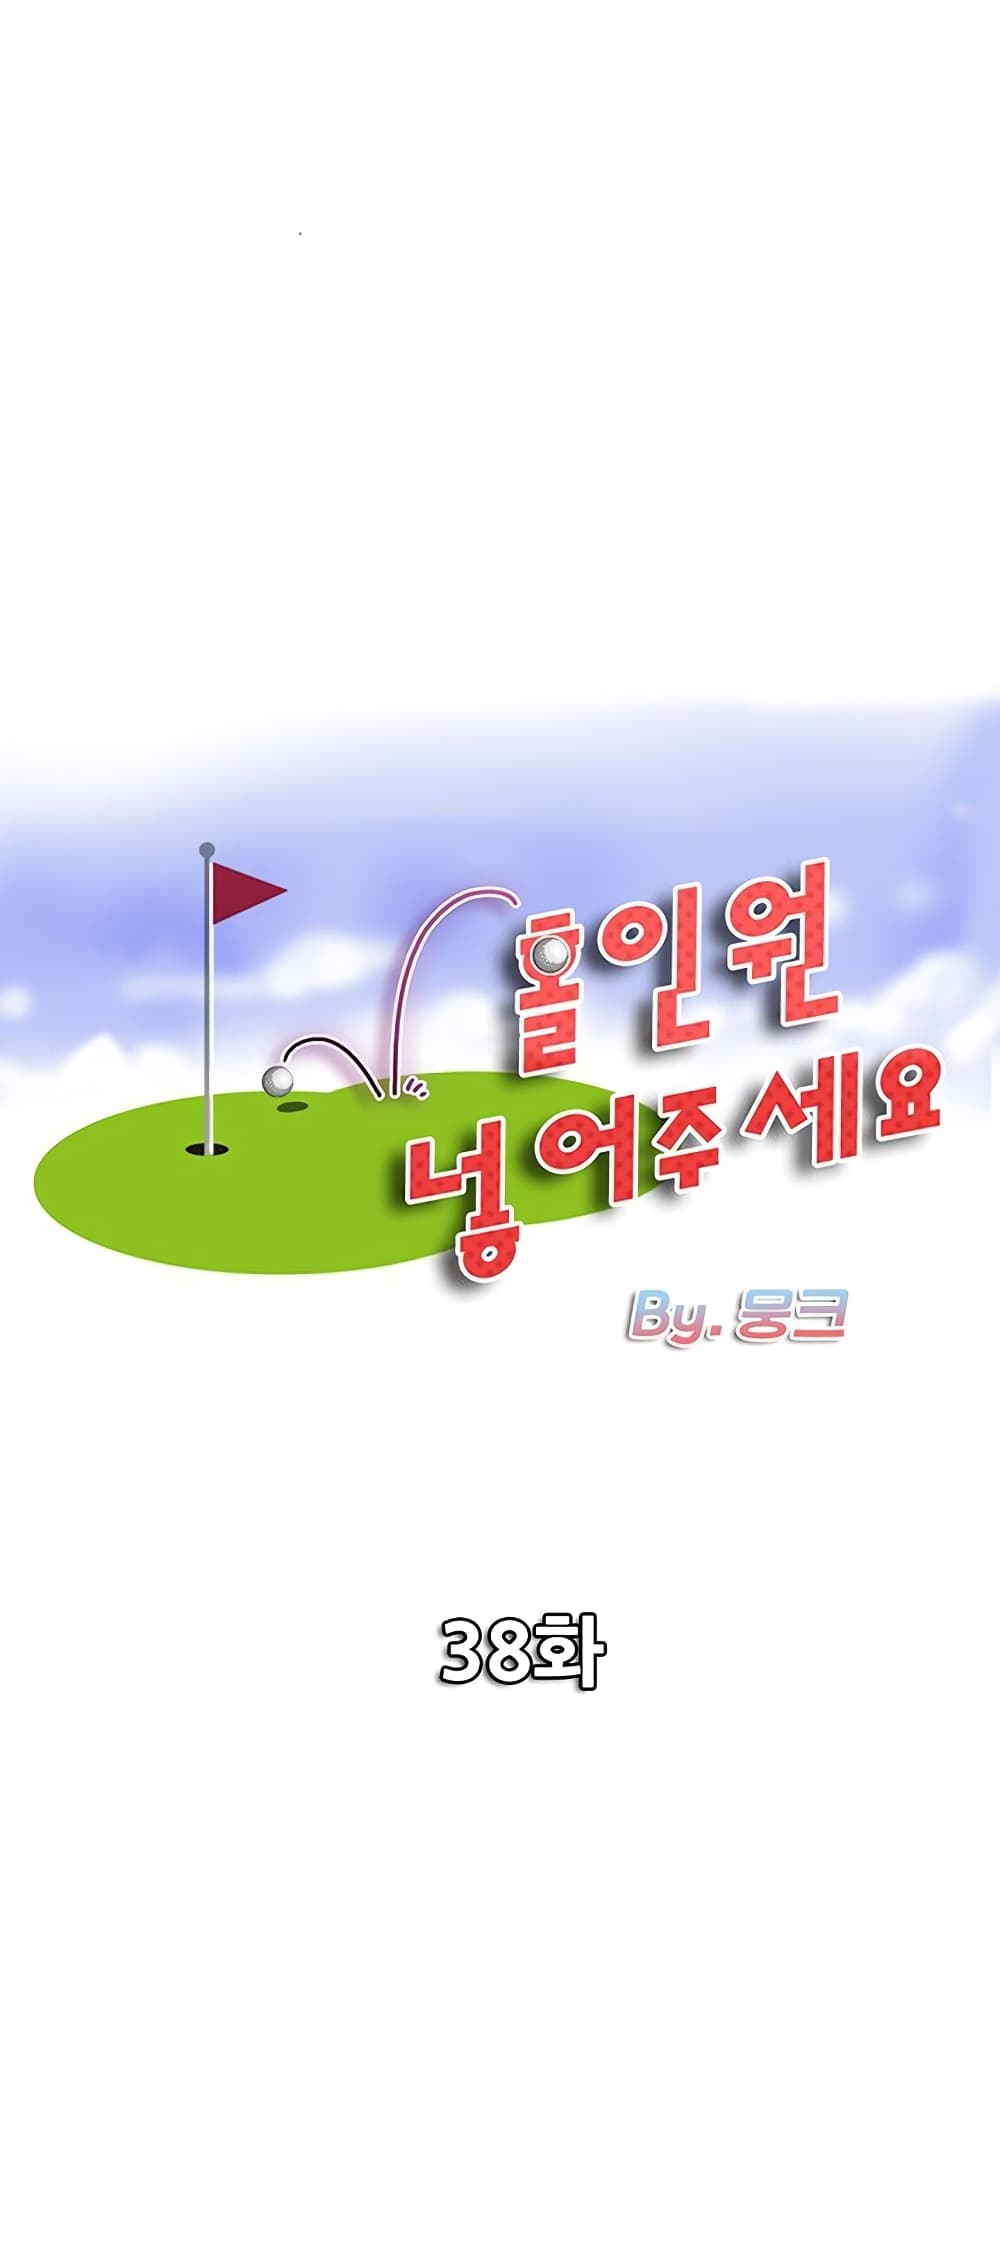 Hole In One 38 (1)